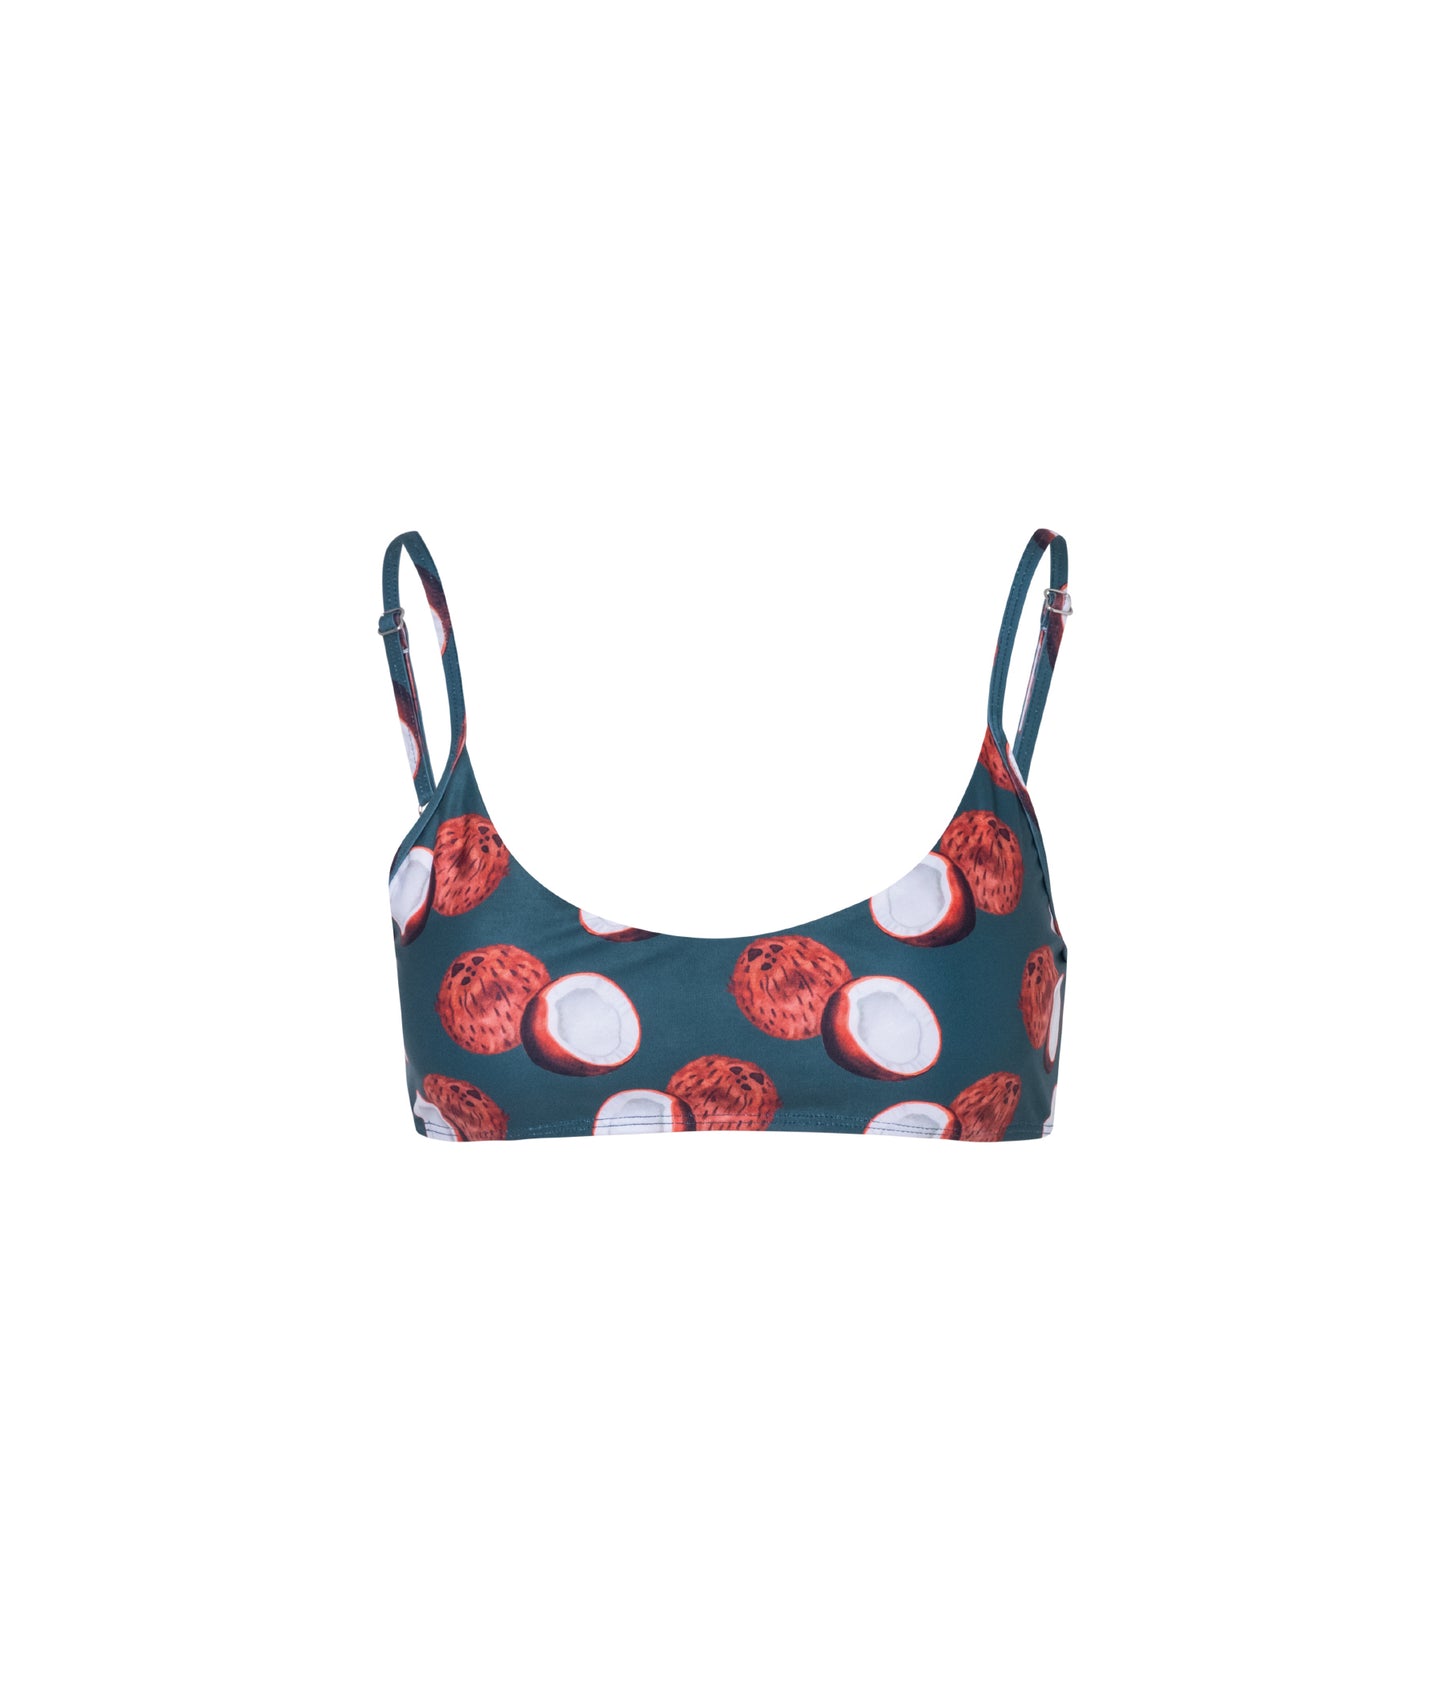 Load image into Gallery viewer, Verdelimon - Bikini Top - Sol - Printed - Petrol Blue Cocos - Front
